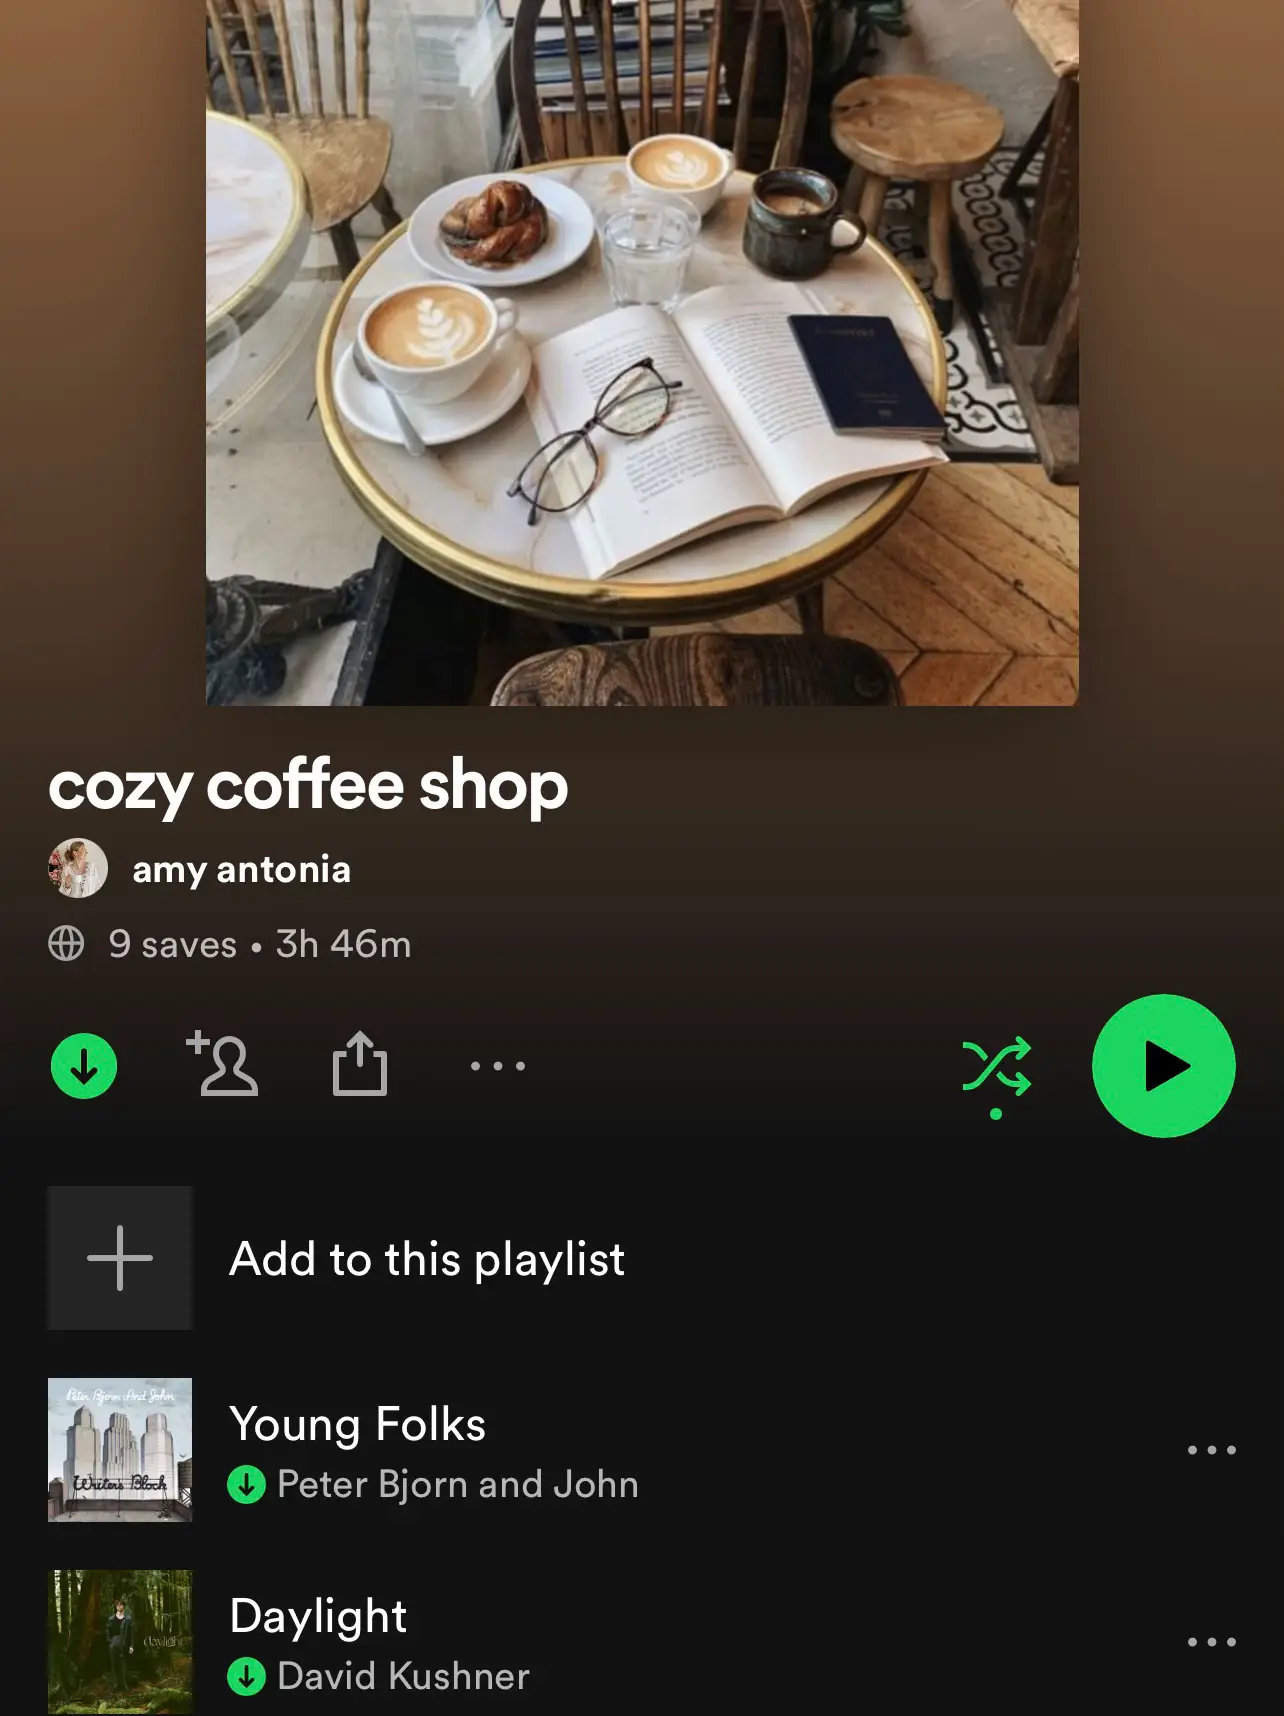  A playlist of music from a cozy coffee shop.